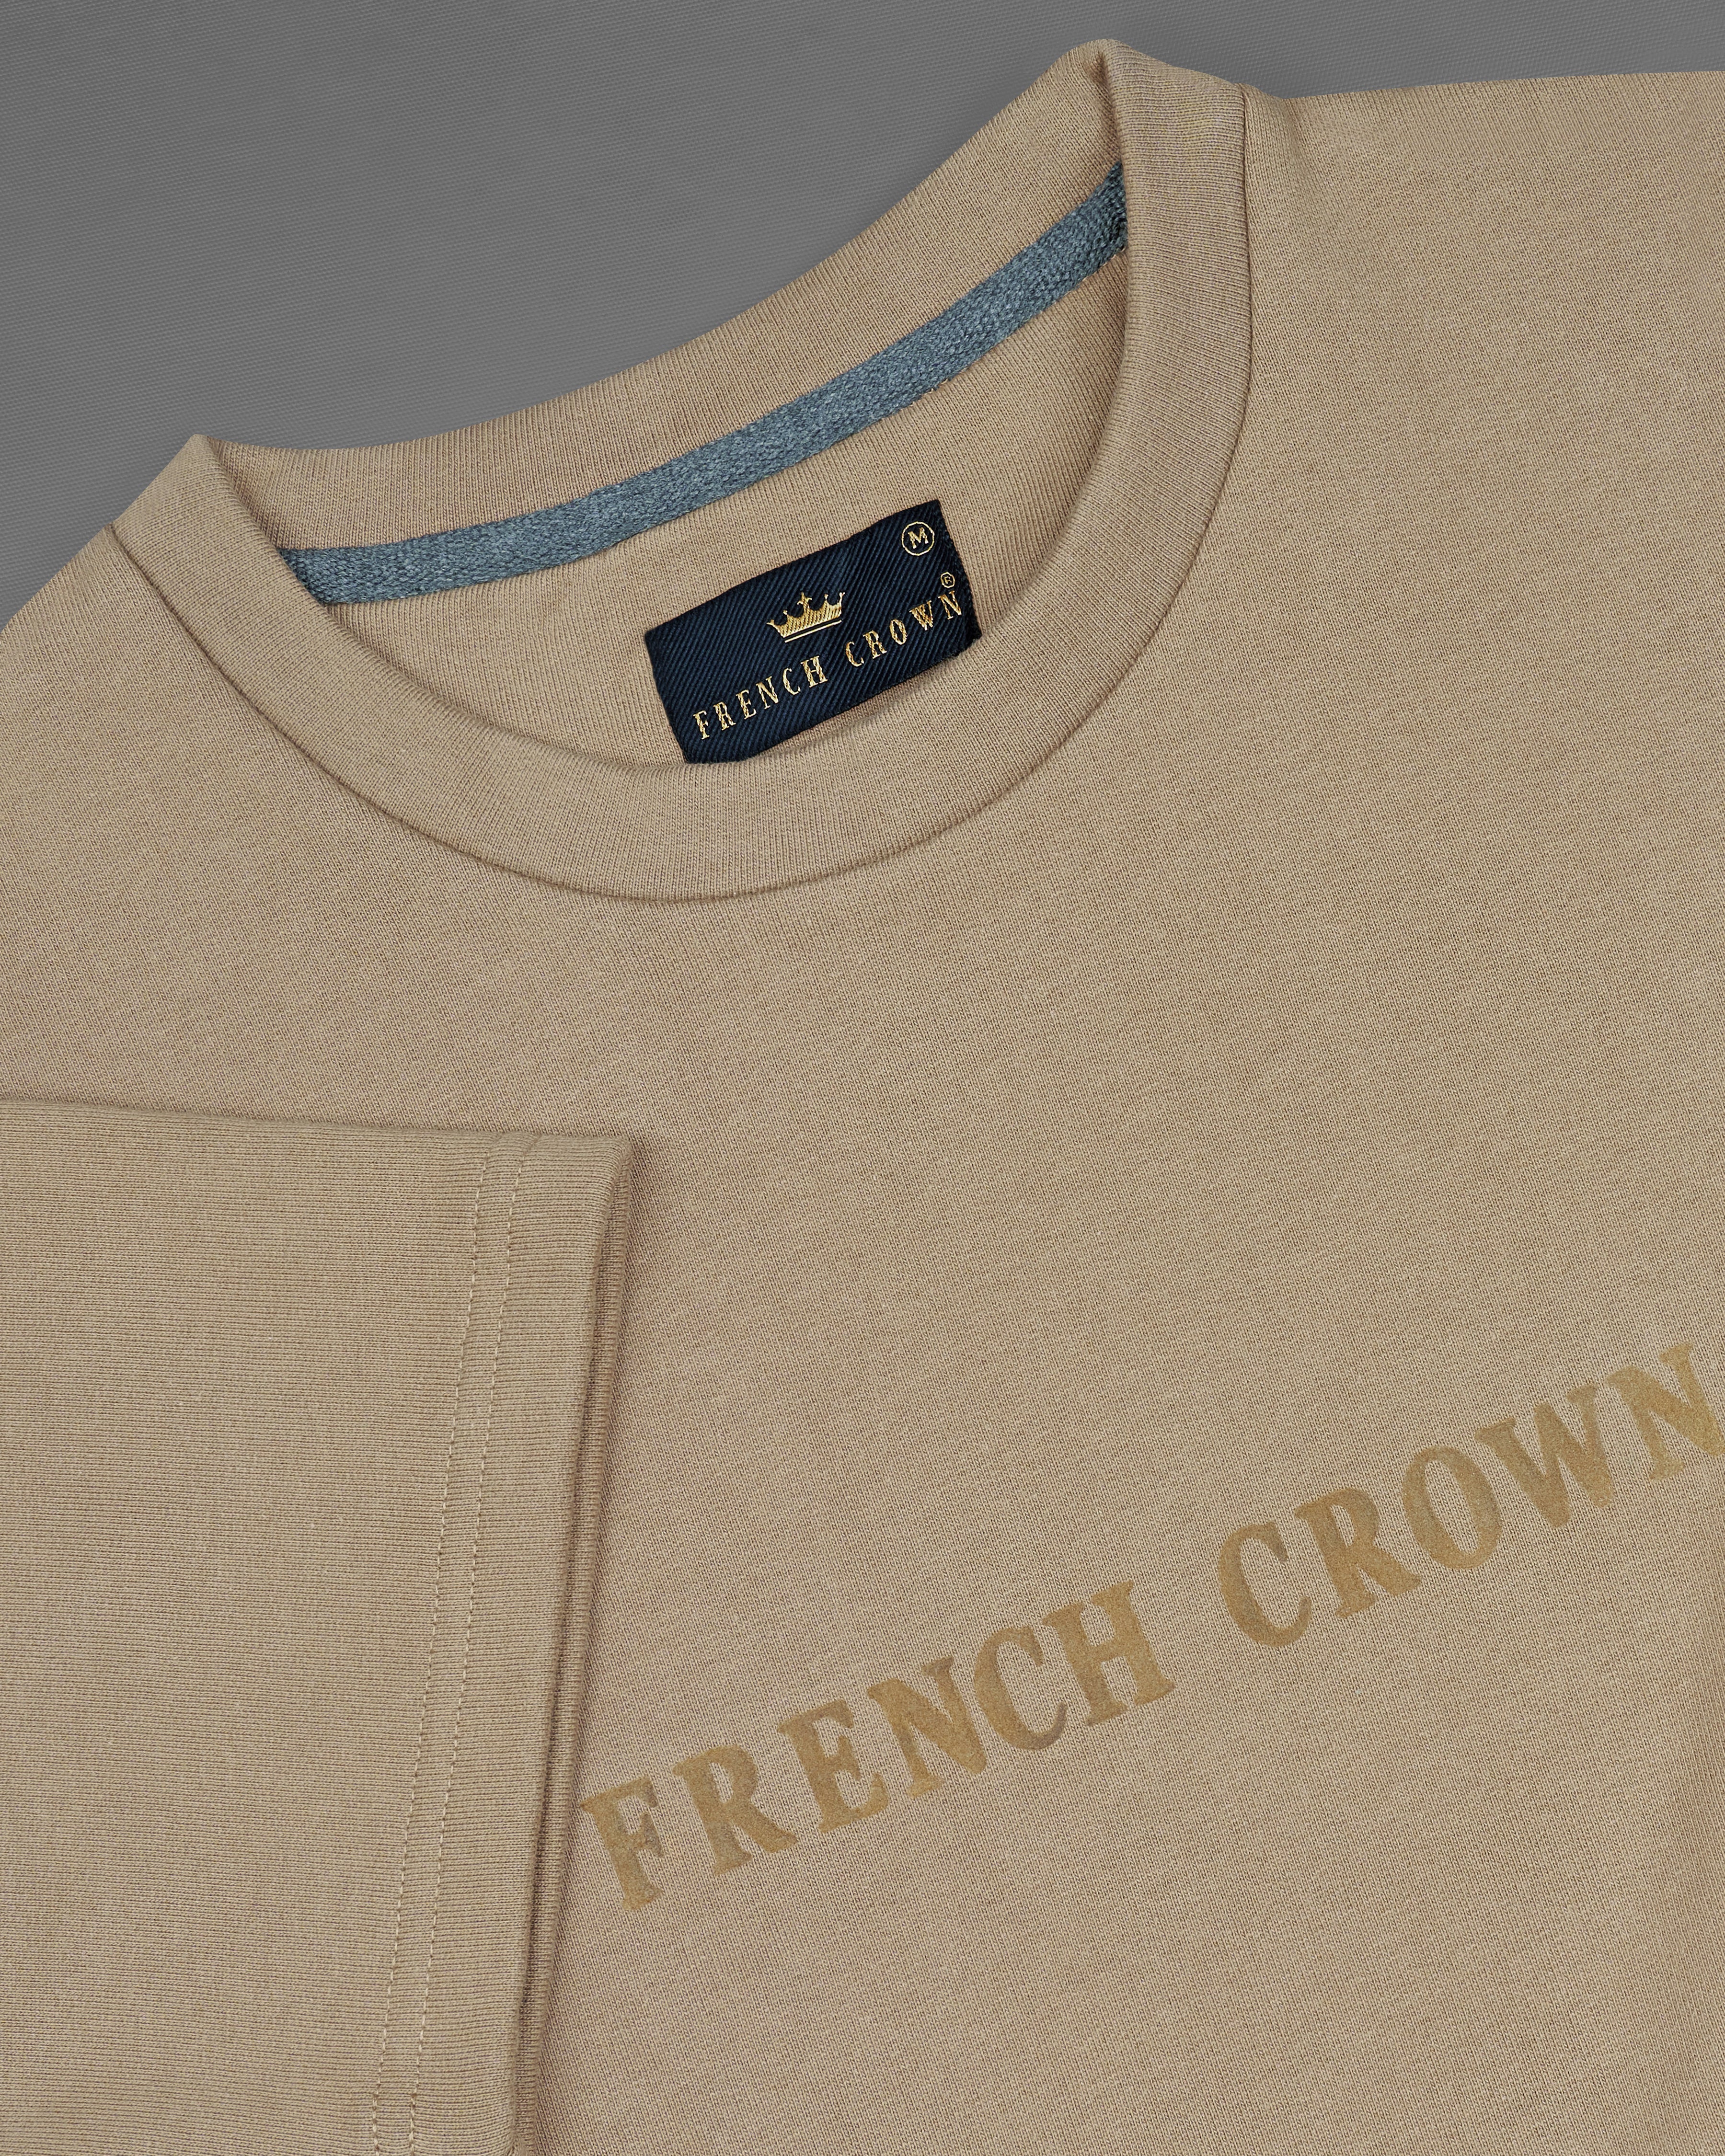 Pale Oyster Brown With Embroidered Premium Cotton Signature T-shirt TS695-S, TS695-M, TS695-L, TS695-XL, TS695-XXL